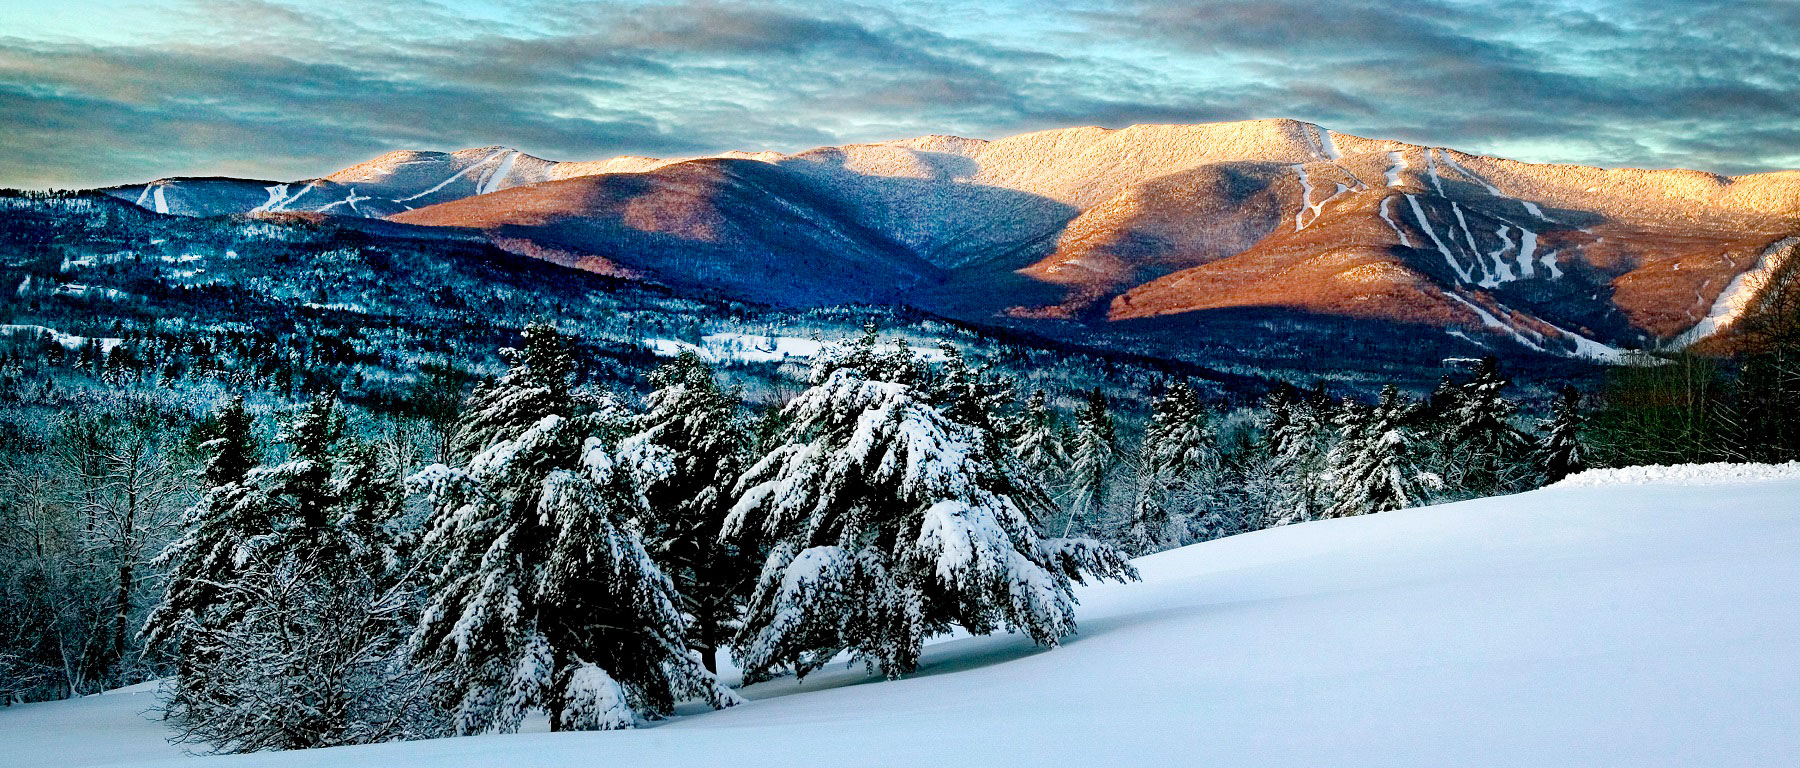 Winter Sunset on Ski Mountains - Photo Credit VT Dept of Tourism and Marketing